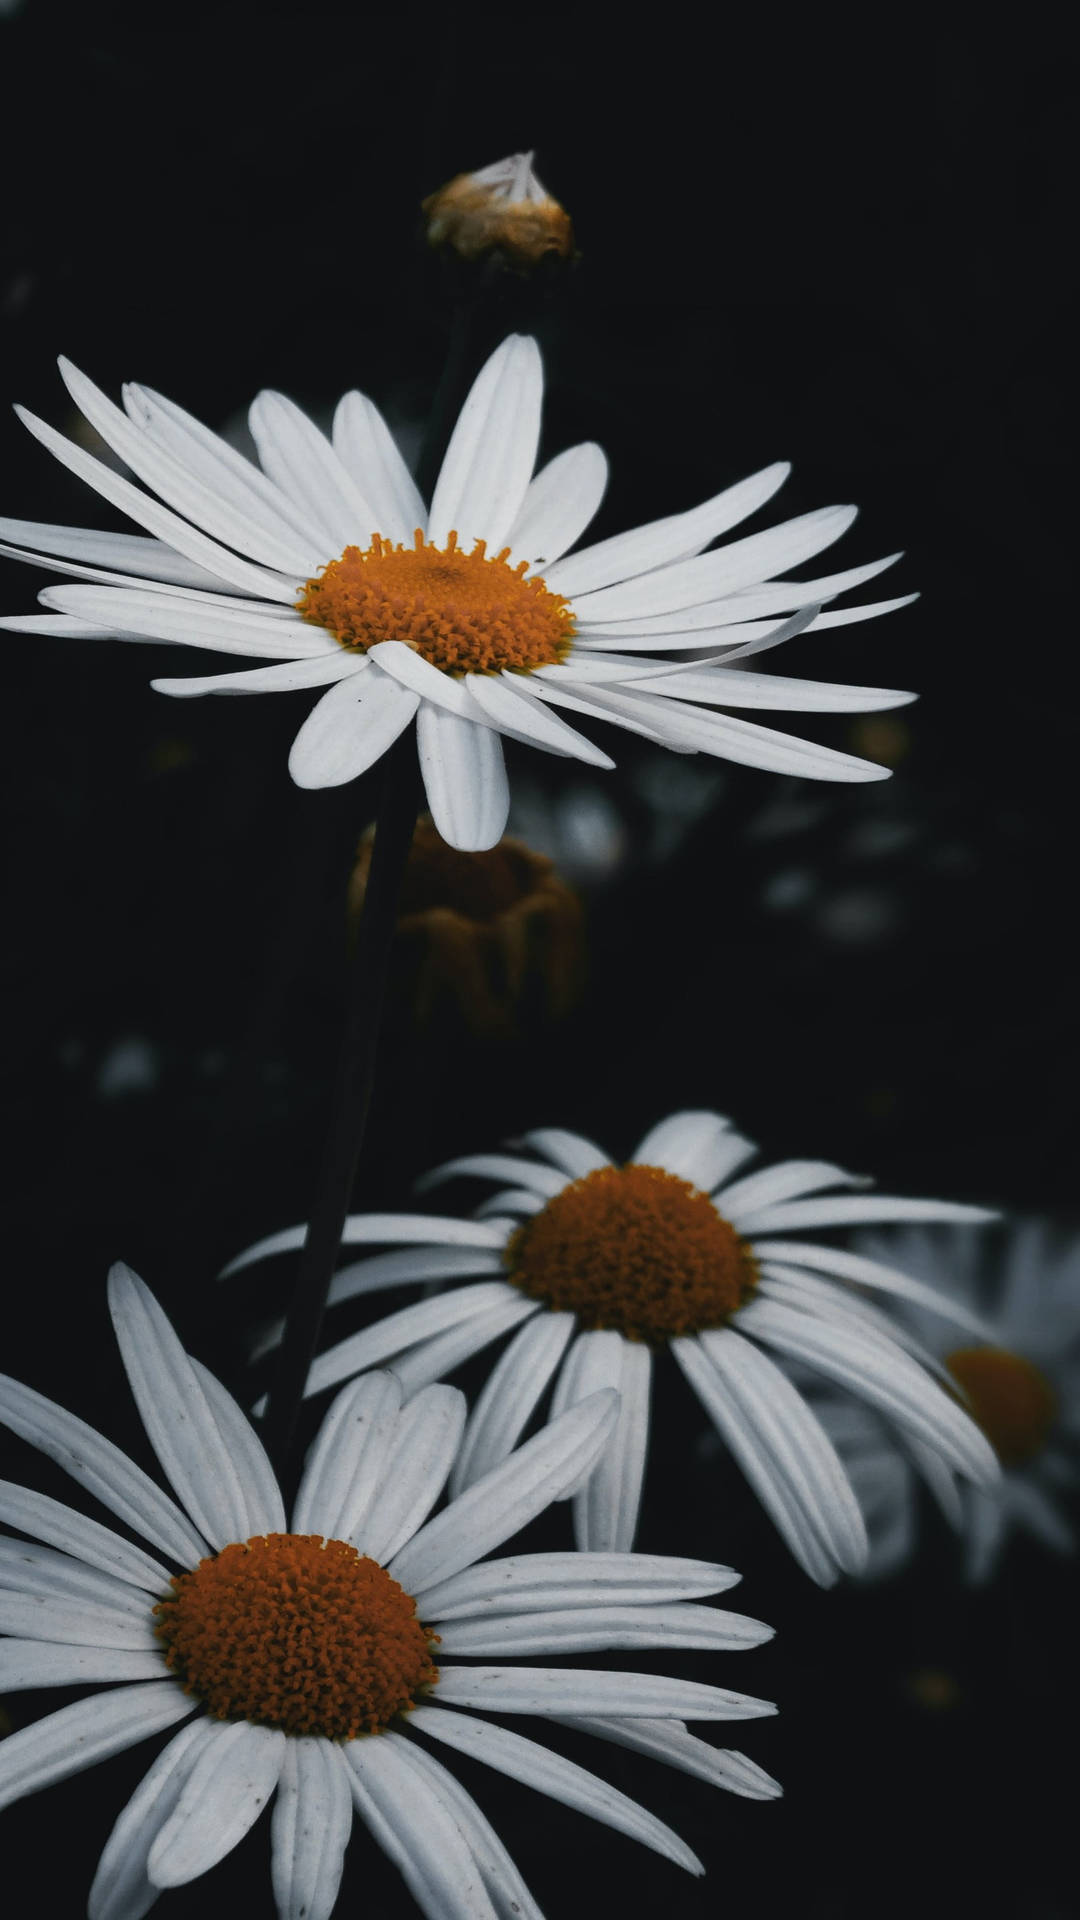 Black And White Flower Blooming Daisies Wallpaper